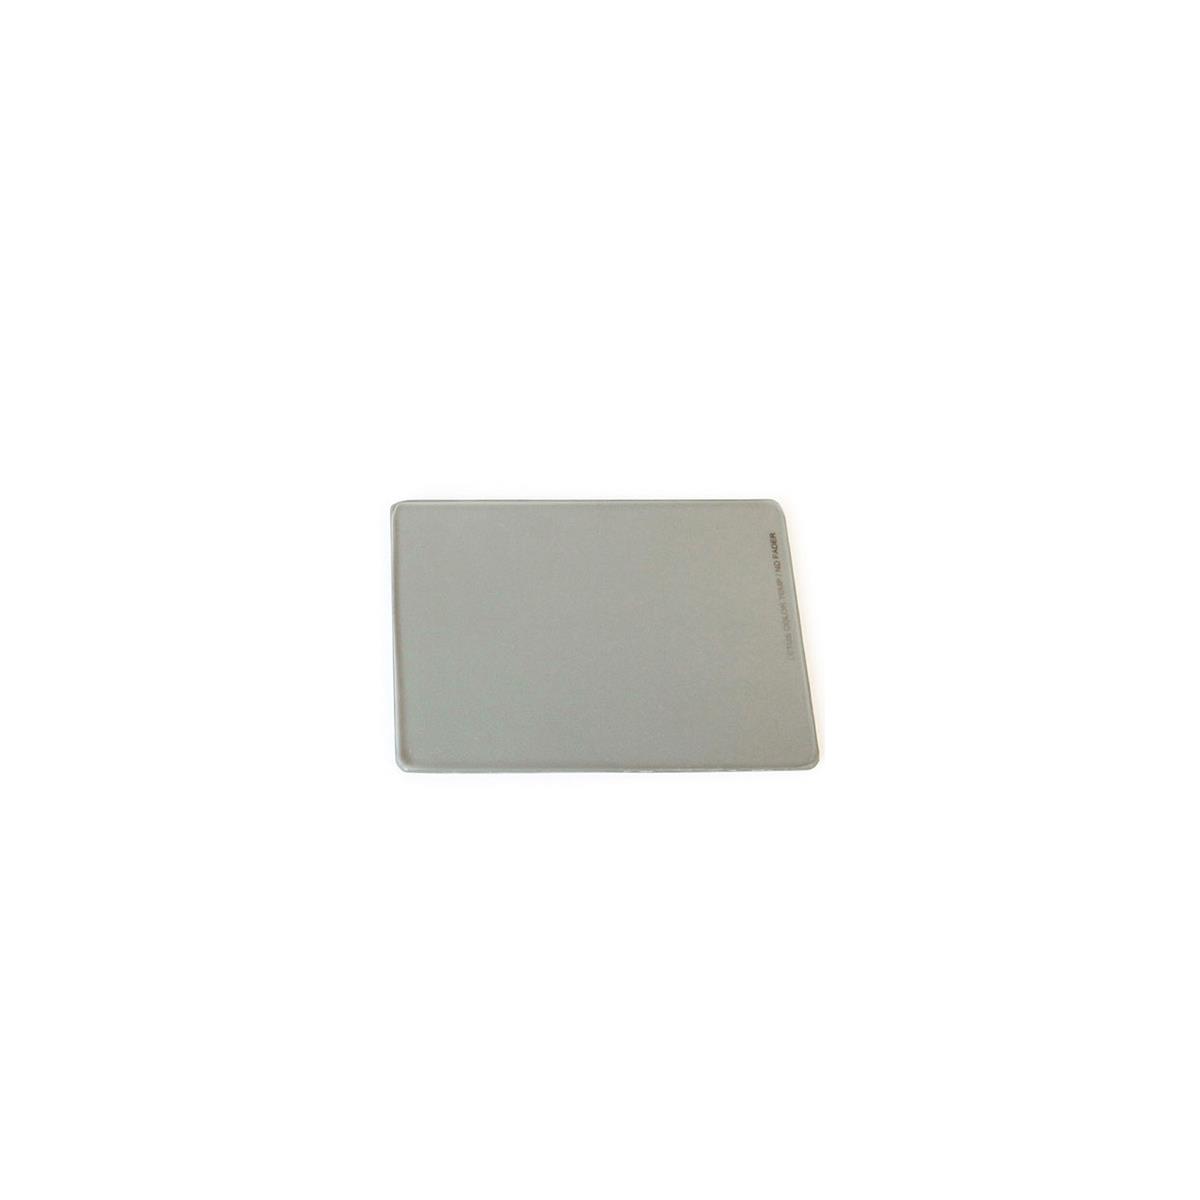 Image of Letus 4x5.6 ND Filter for Filter Trays